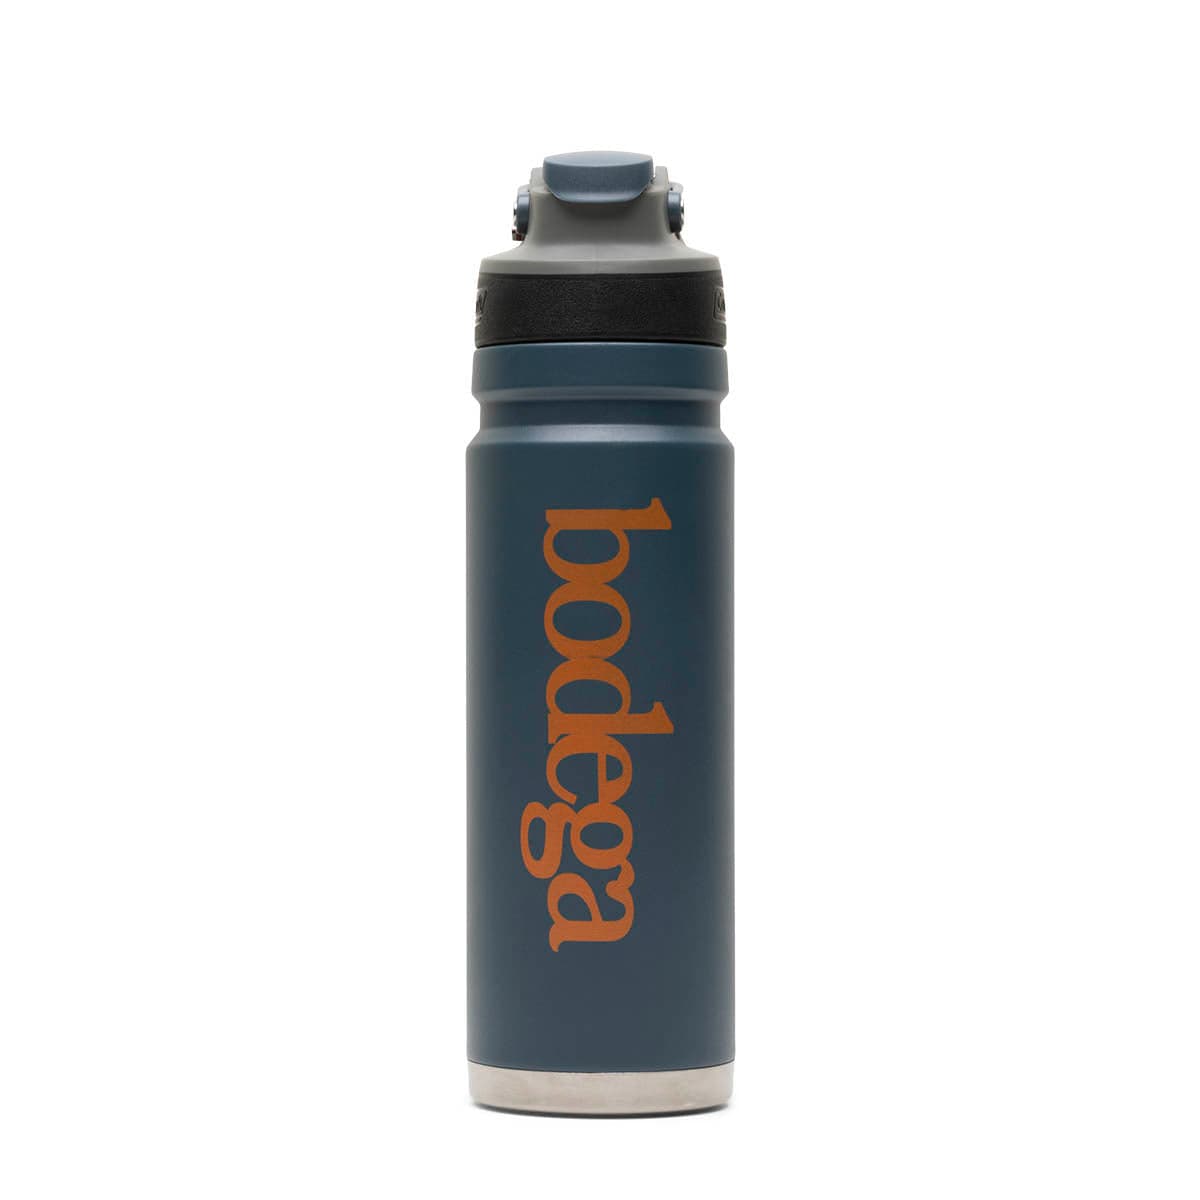 BEST INSULATED BOTTLE!!! Coleman FreeFlow AUTOSEAL Insulated Stainless  Steel Water Bottle 